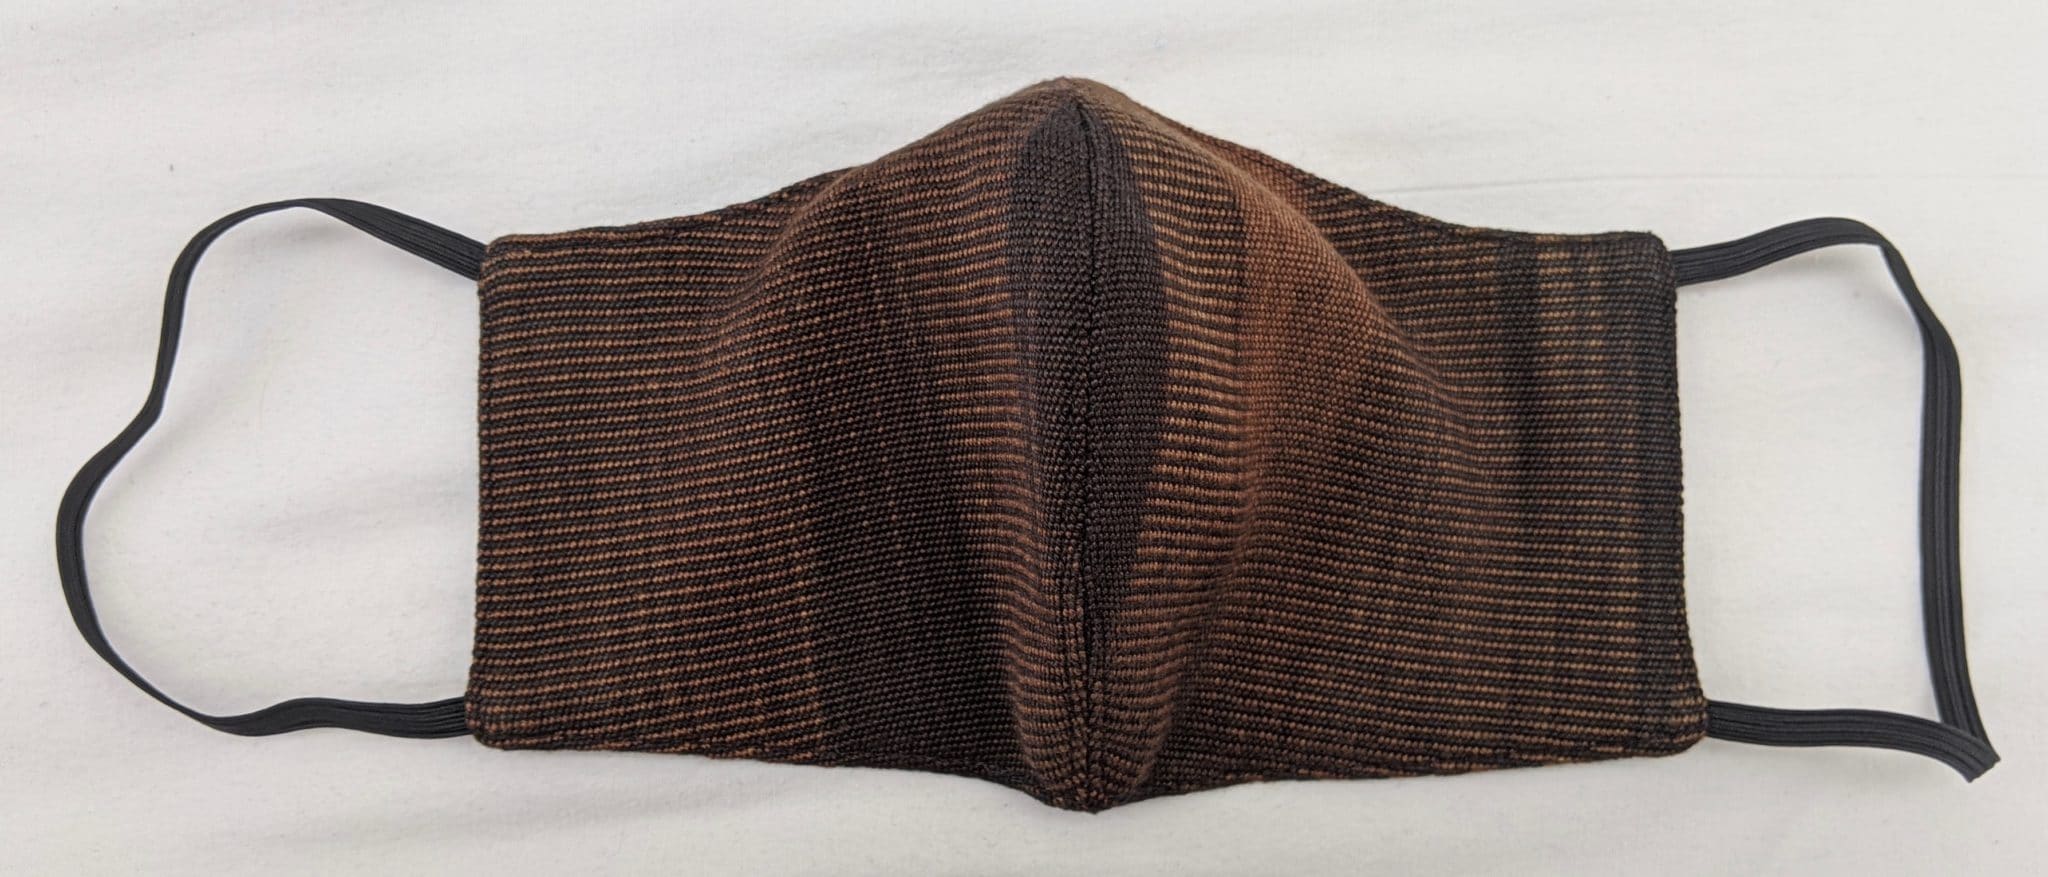 Handwoven Lightweight Bamboo Face Mask with Elastic Behind Ears - Browns and Black